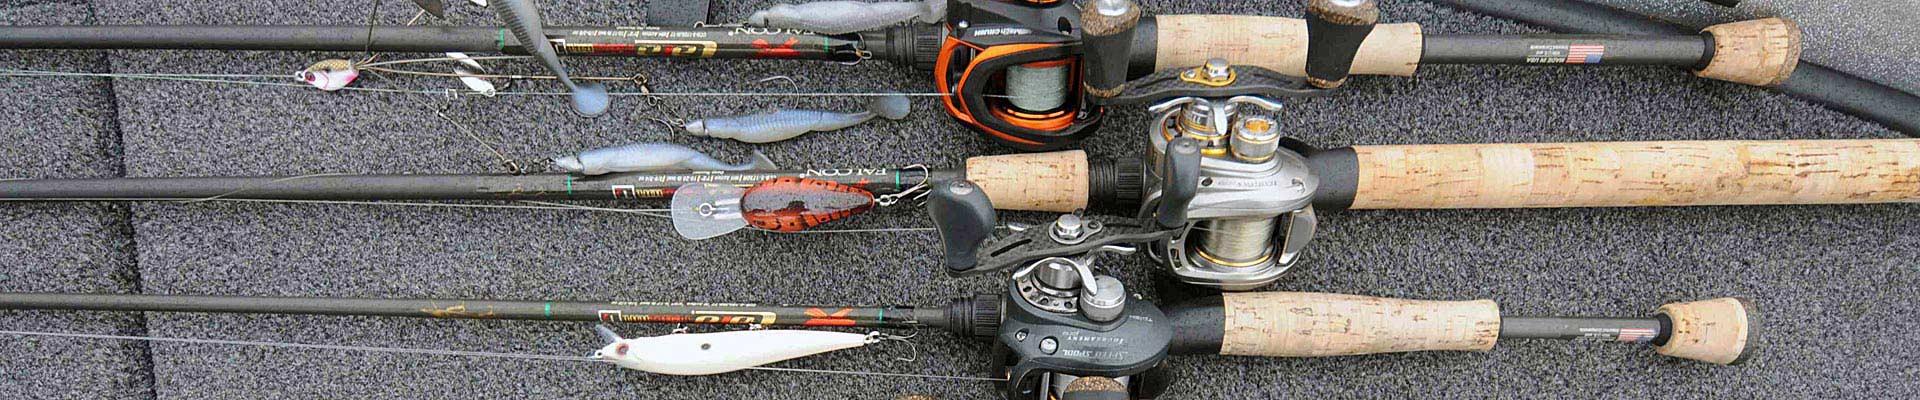 Beginner's Guide to Bass Fishing Rods  The Ultimate Bass Fishing Resource  Guide® LLC